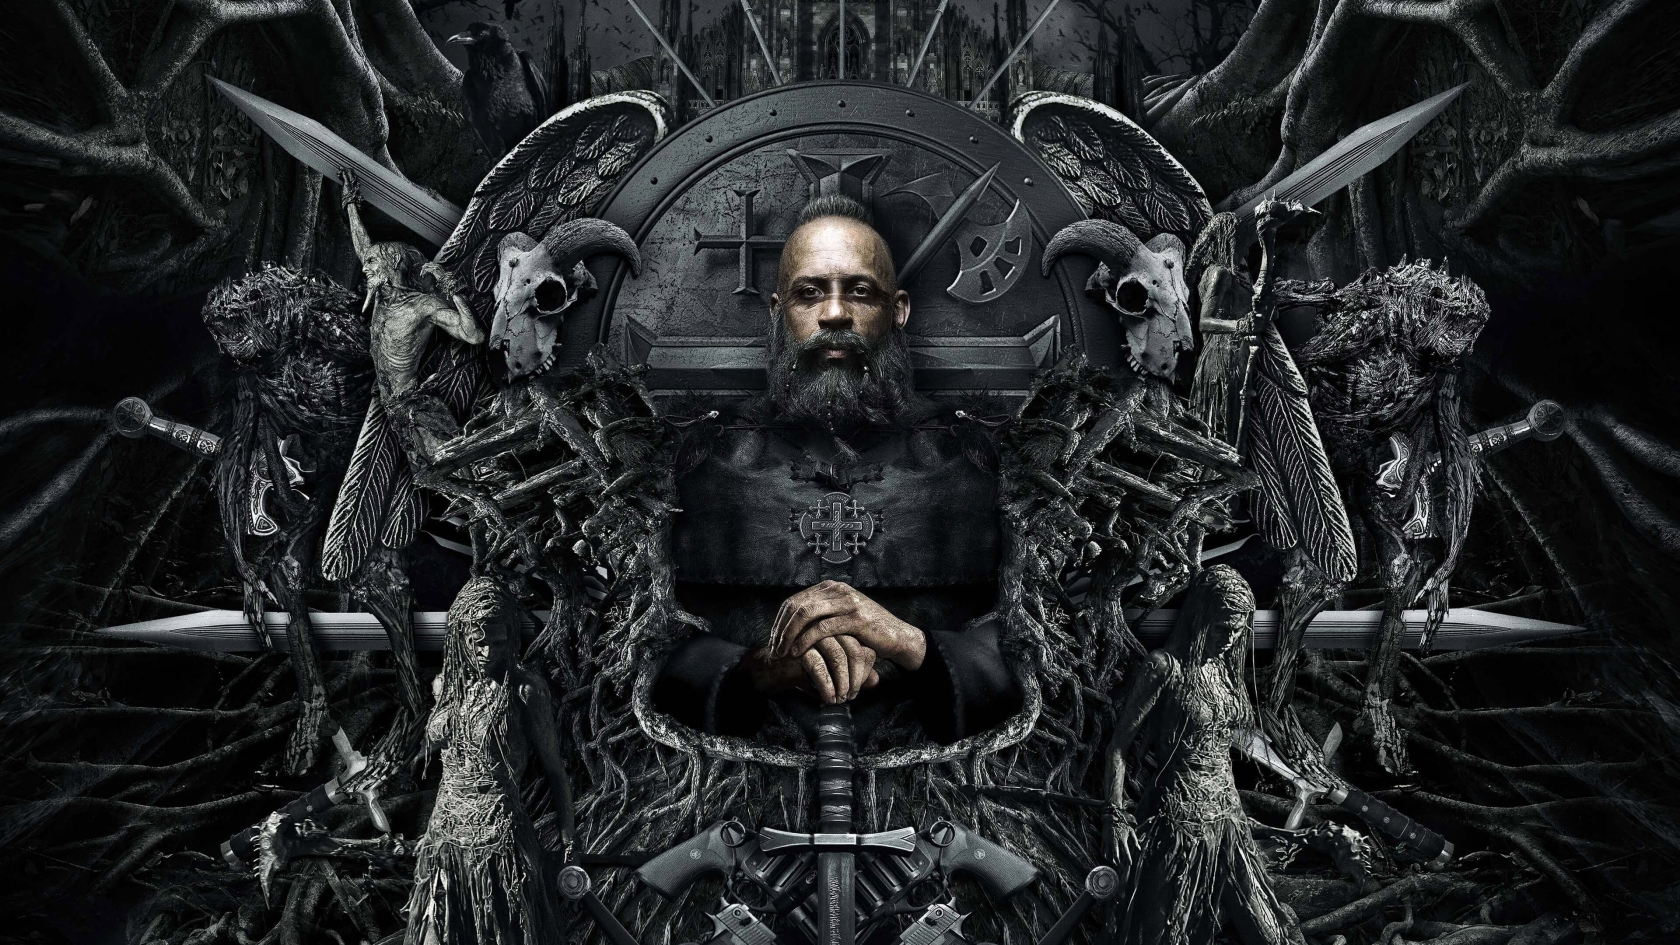 The Last Witch Hunter Throne for 1680 x 945 HDTV resolution